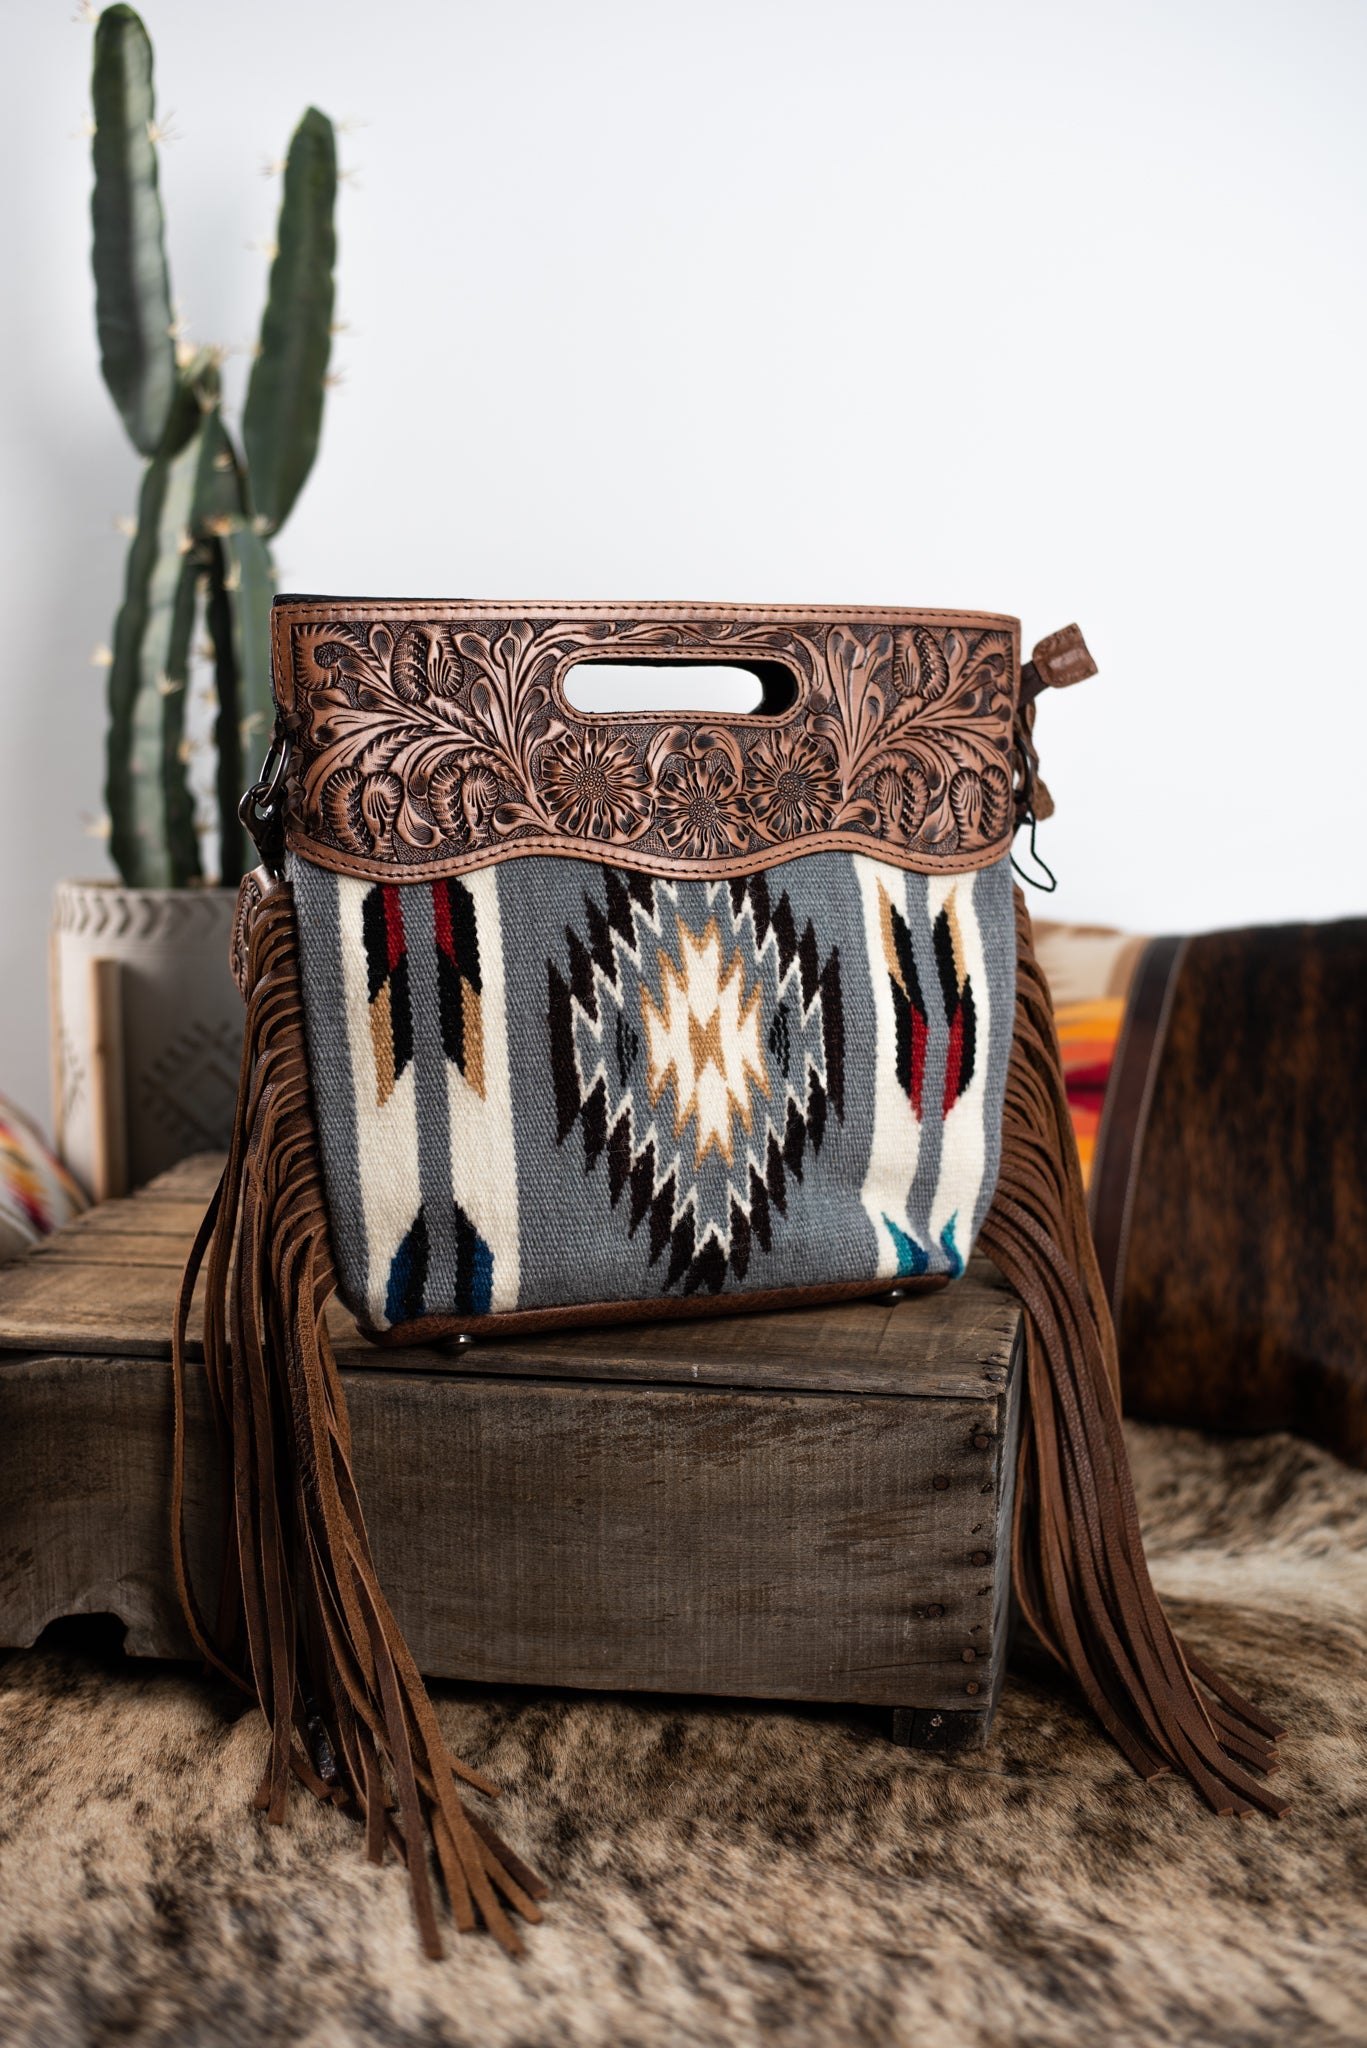 The Brody Saddle Blanket Purse